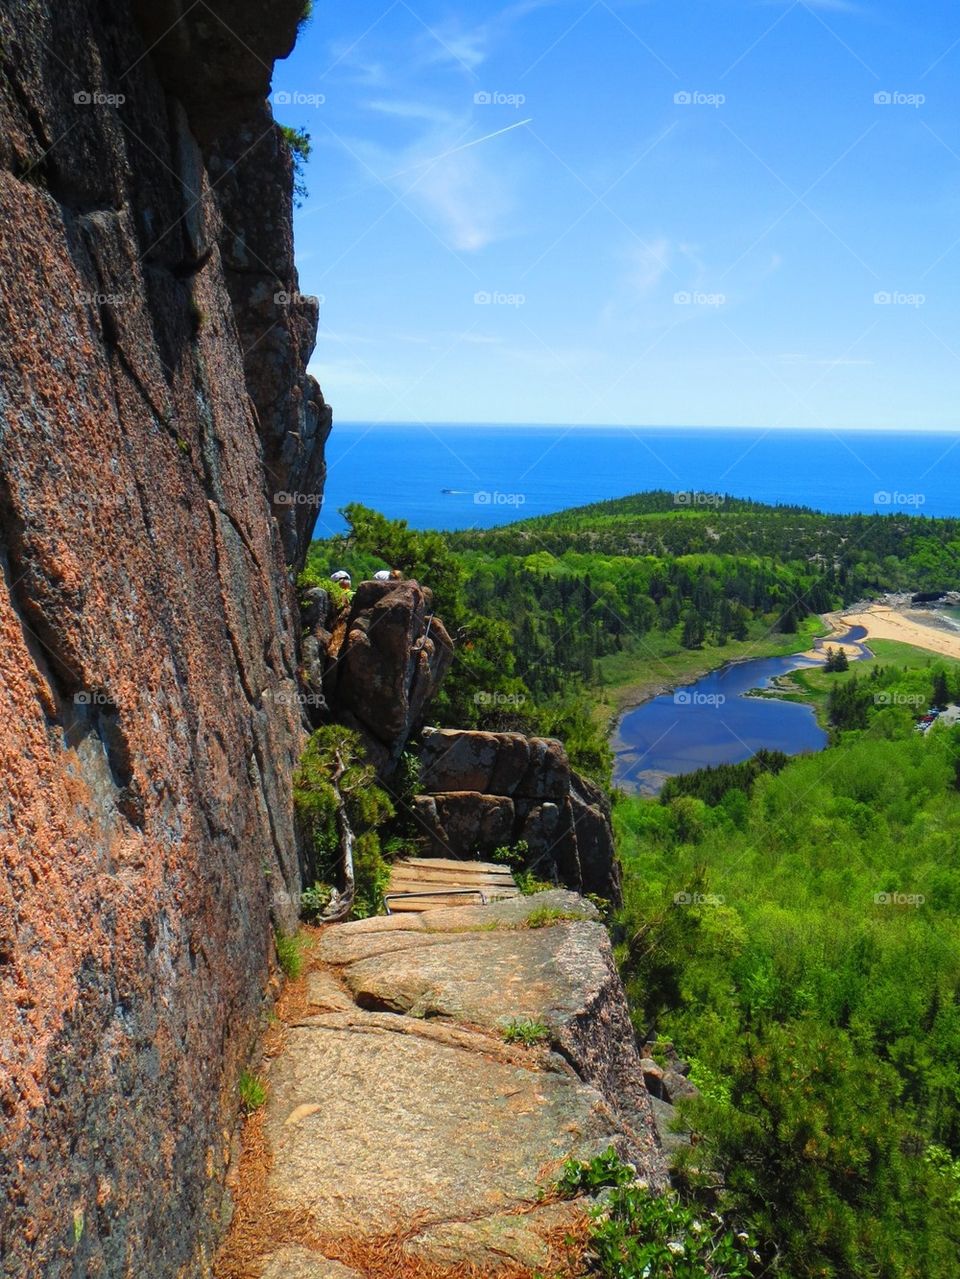 Bee Hive Trail. Climbing the Bee Hive in Acadia National Park